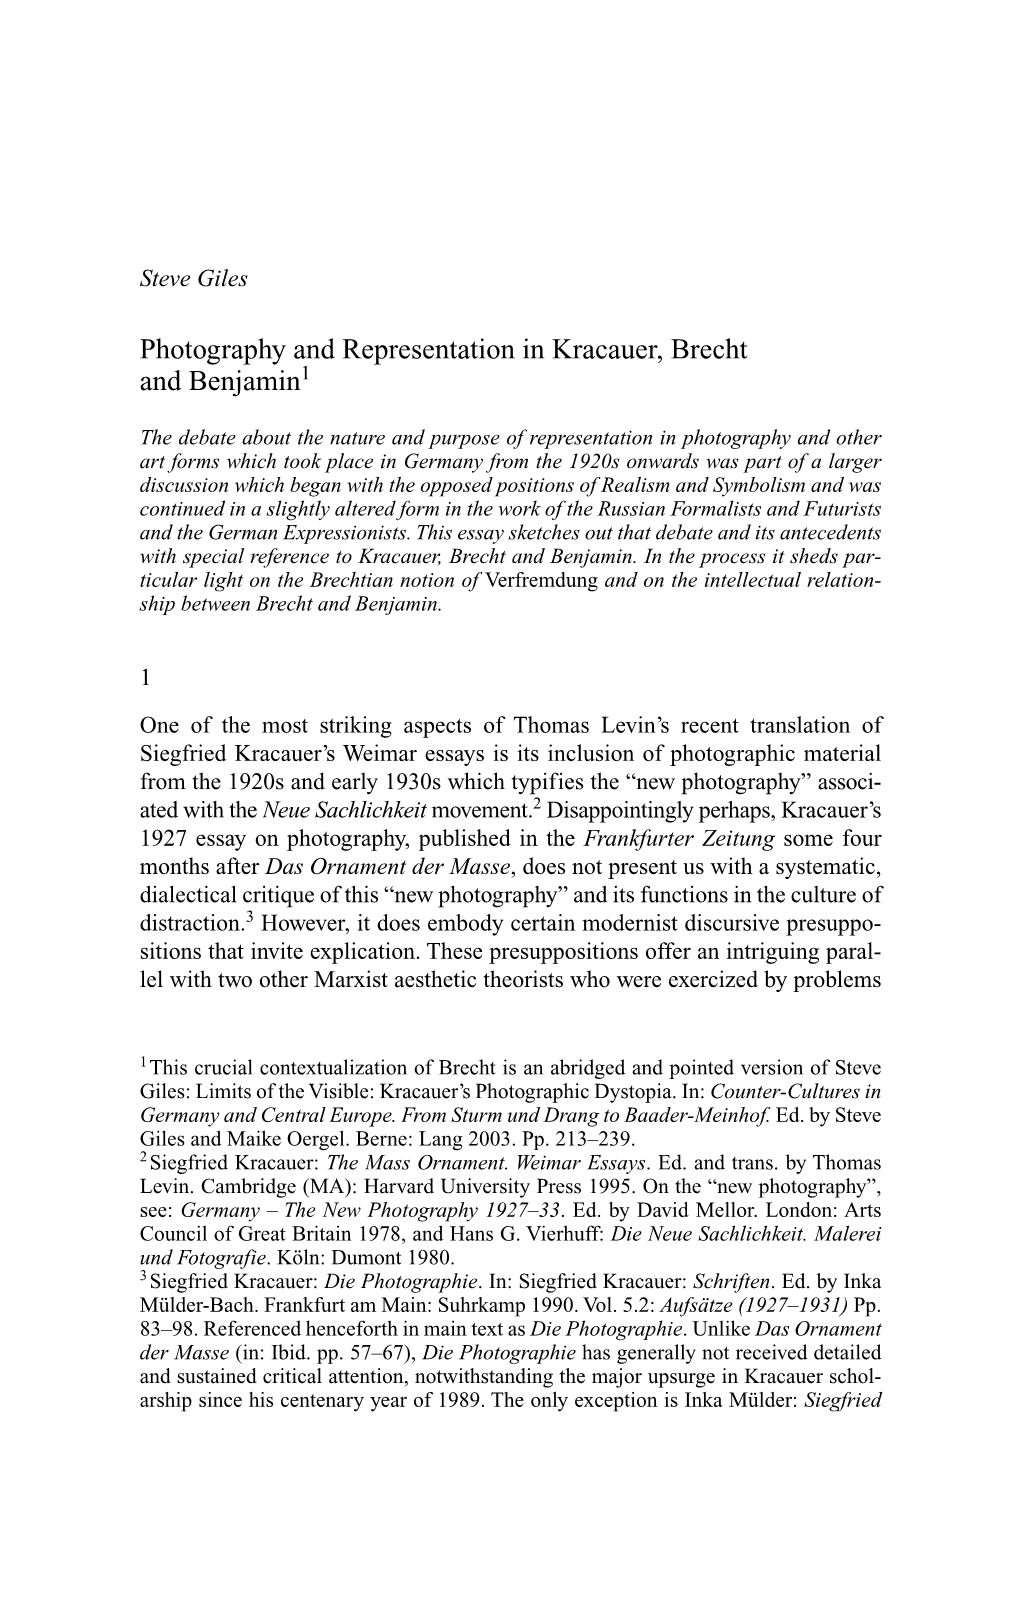 Photography and Representation in Kracauer, Brecht and Benjamin1